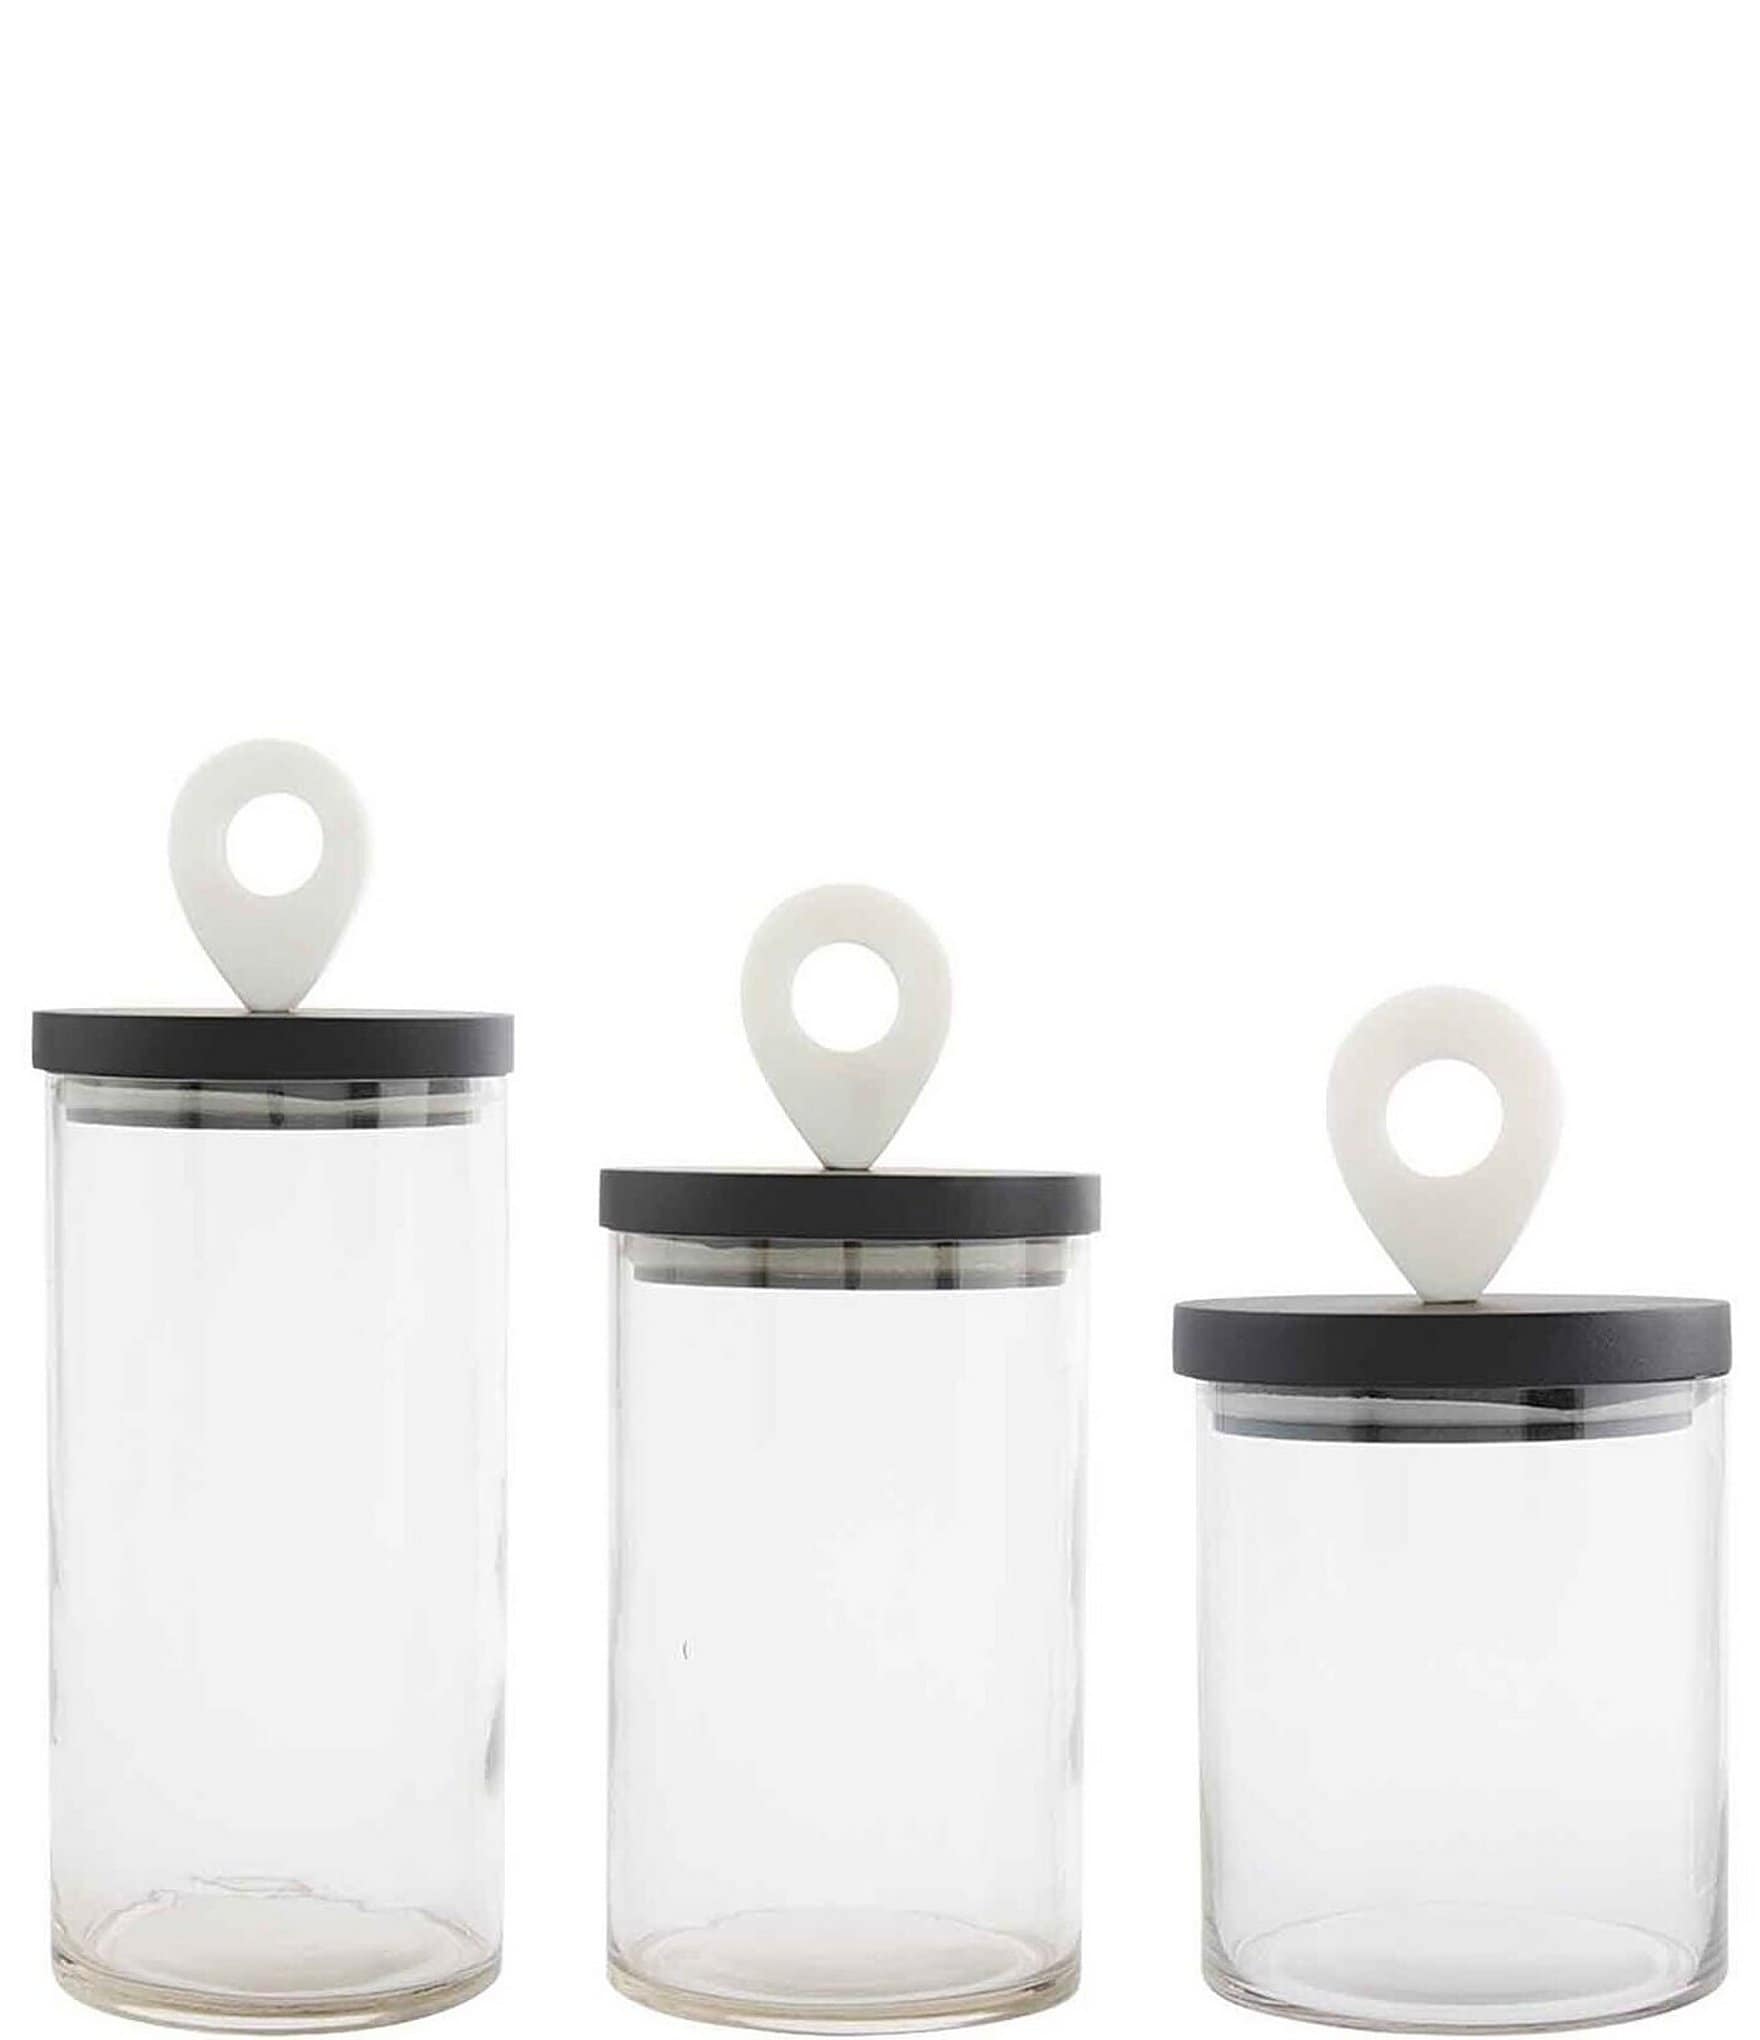 https://dimg.dillards.com/is/image/DillardsZoom/zoom/mud-pie-mercantile-collection-black-and-white-3-piece-glass-canister-set/20258170_zi.jpg